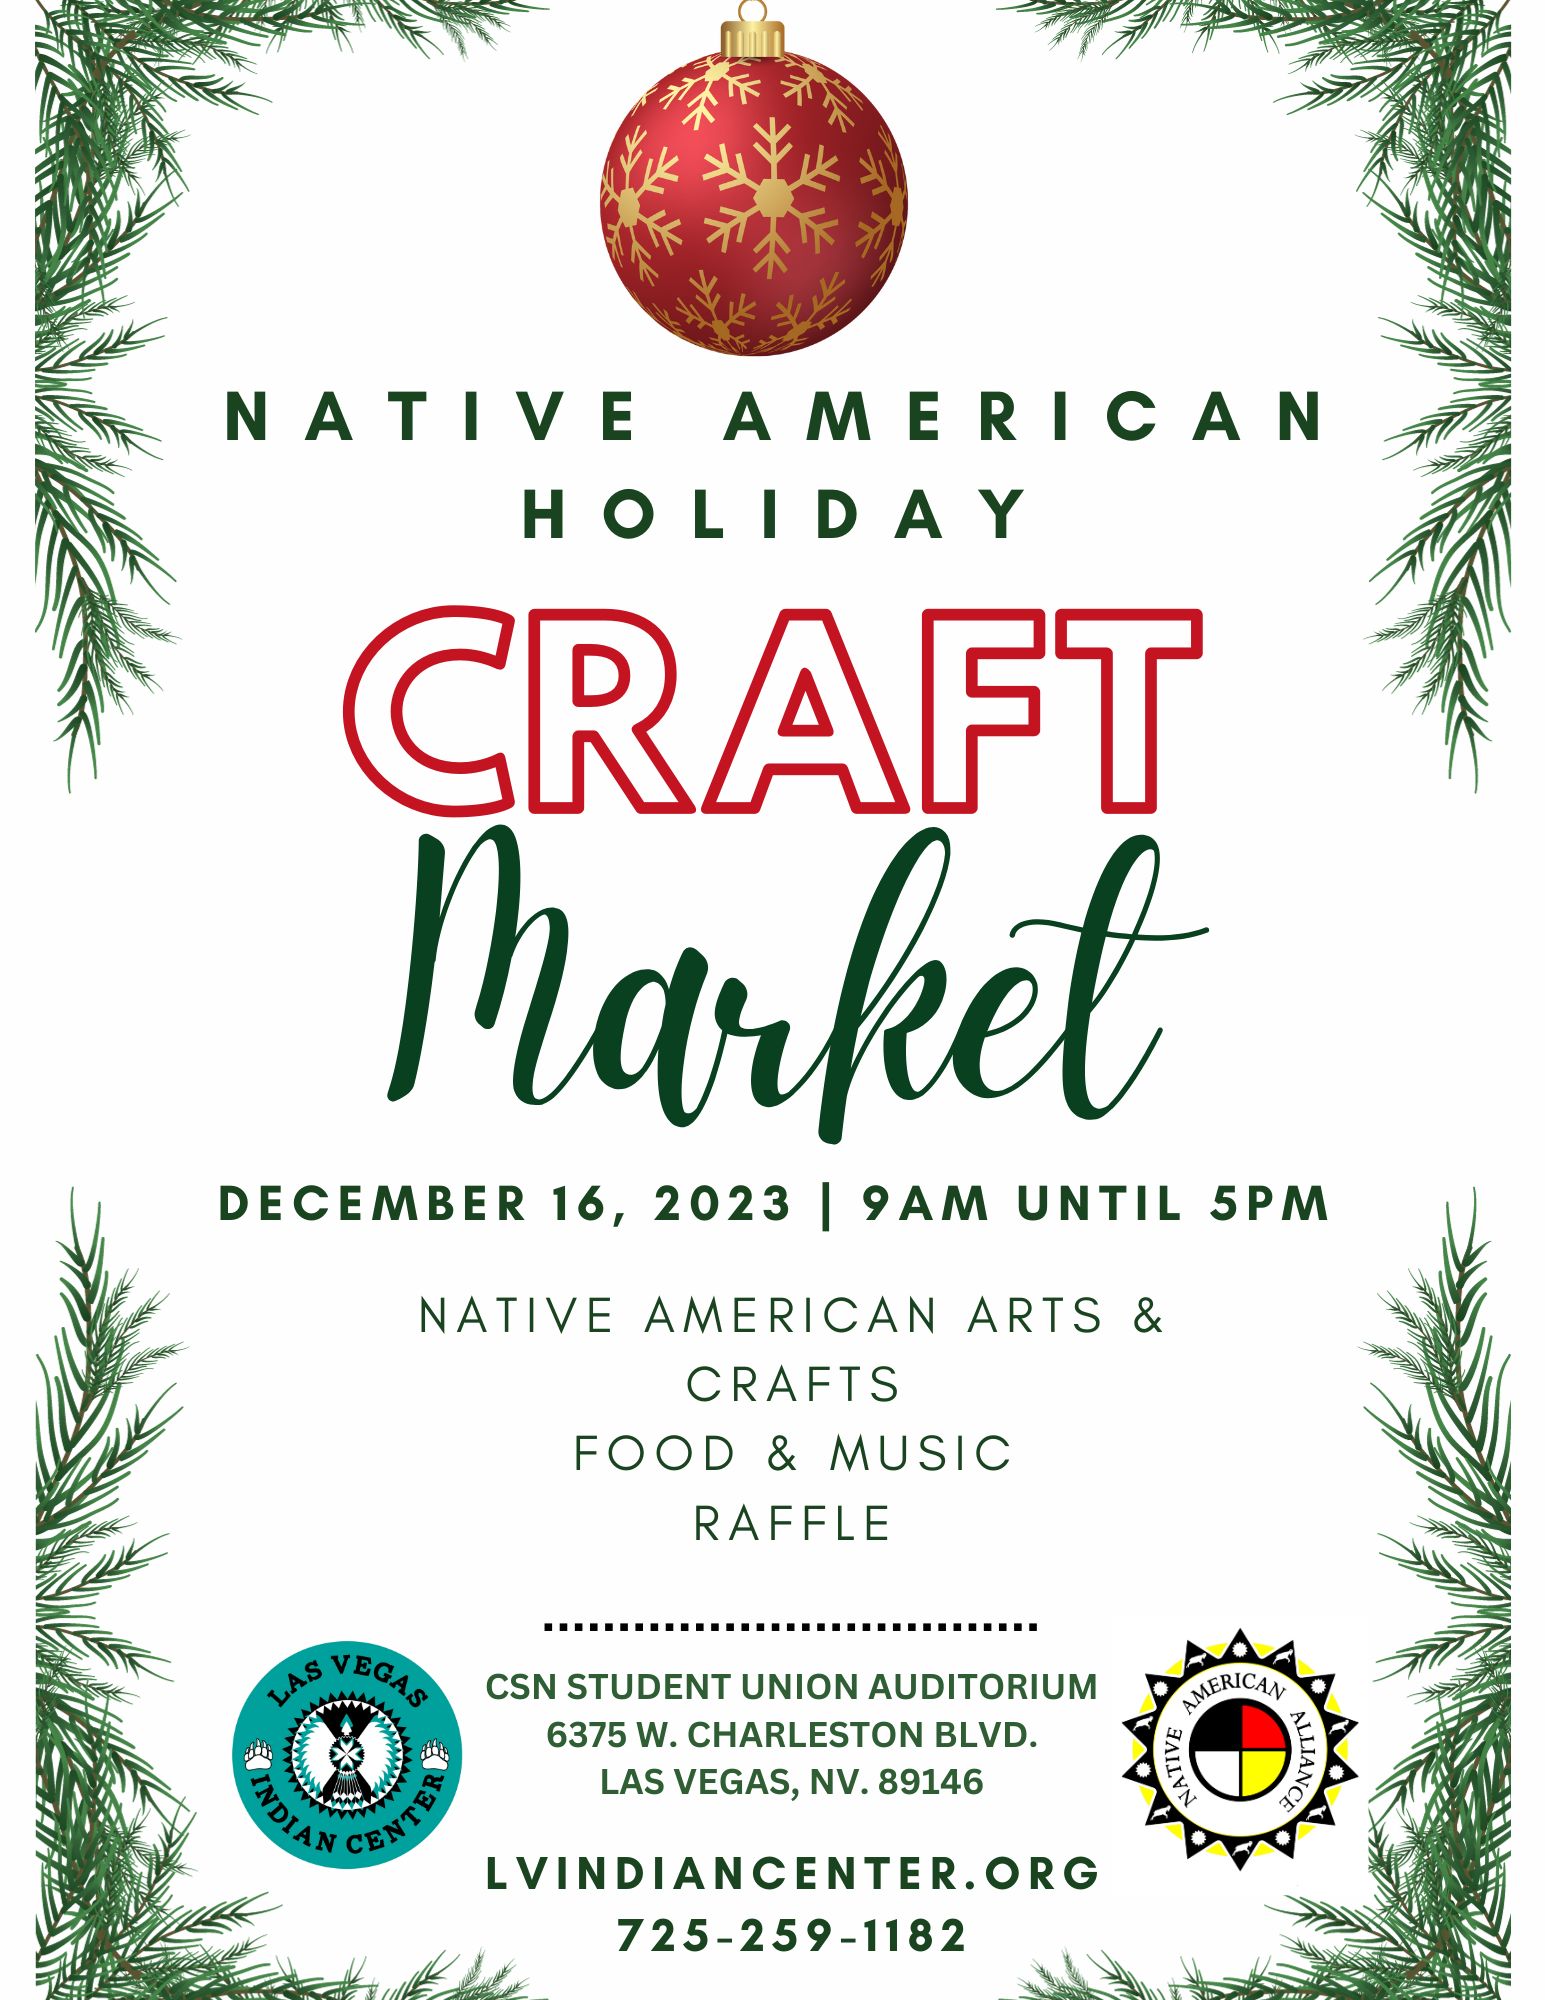 Native American Holiday Craft Market event flyer for December 16, 2023